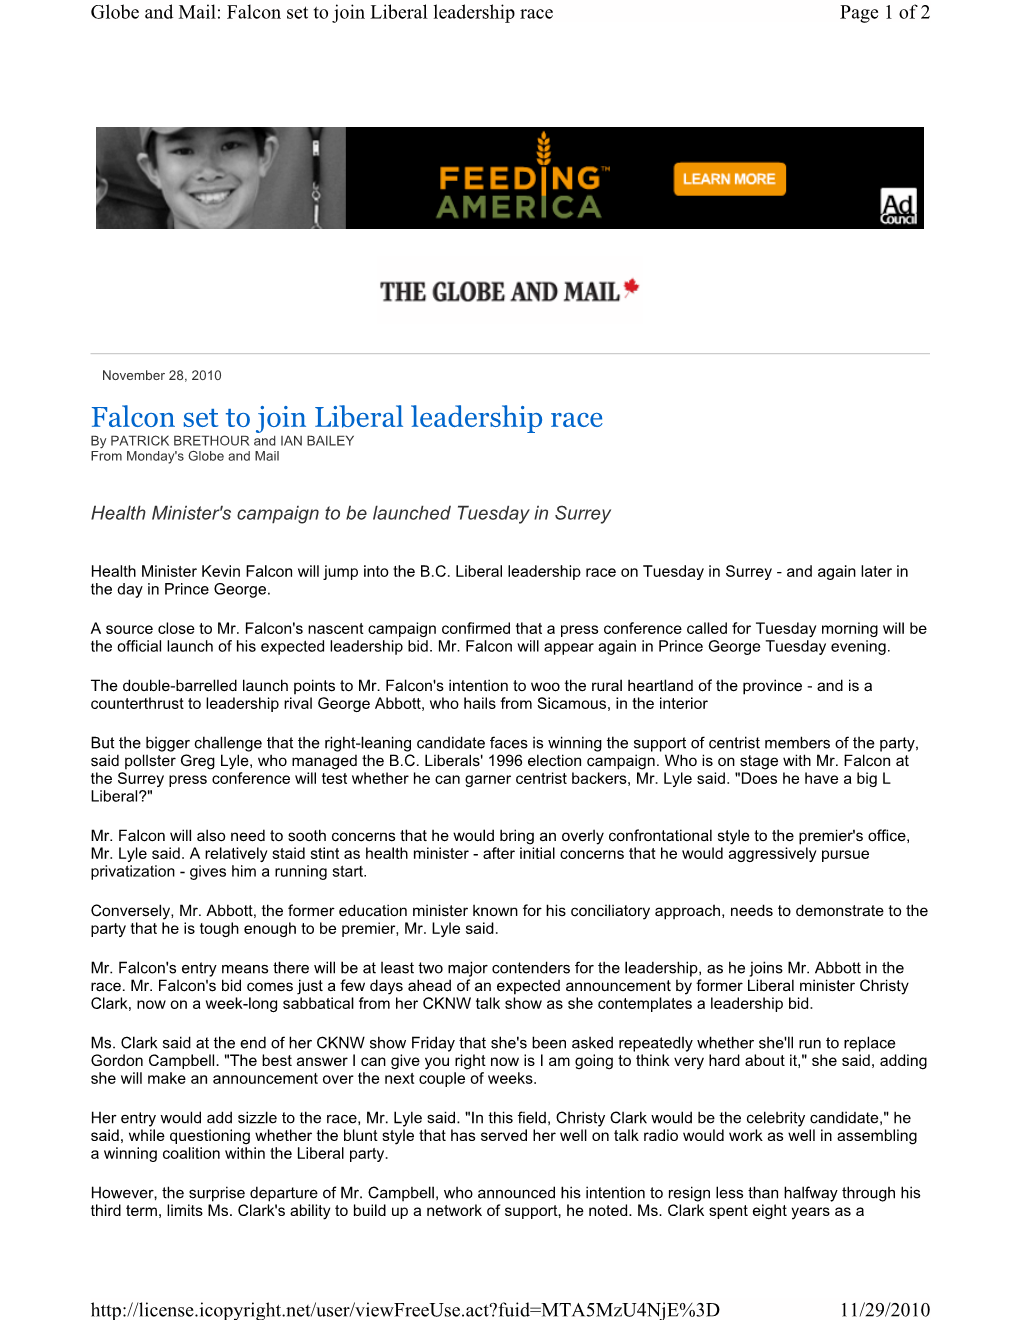 Falcon Set to Join Liberal Leadership Race Page 1 of 2